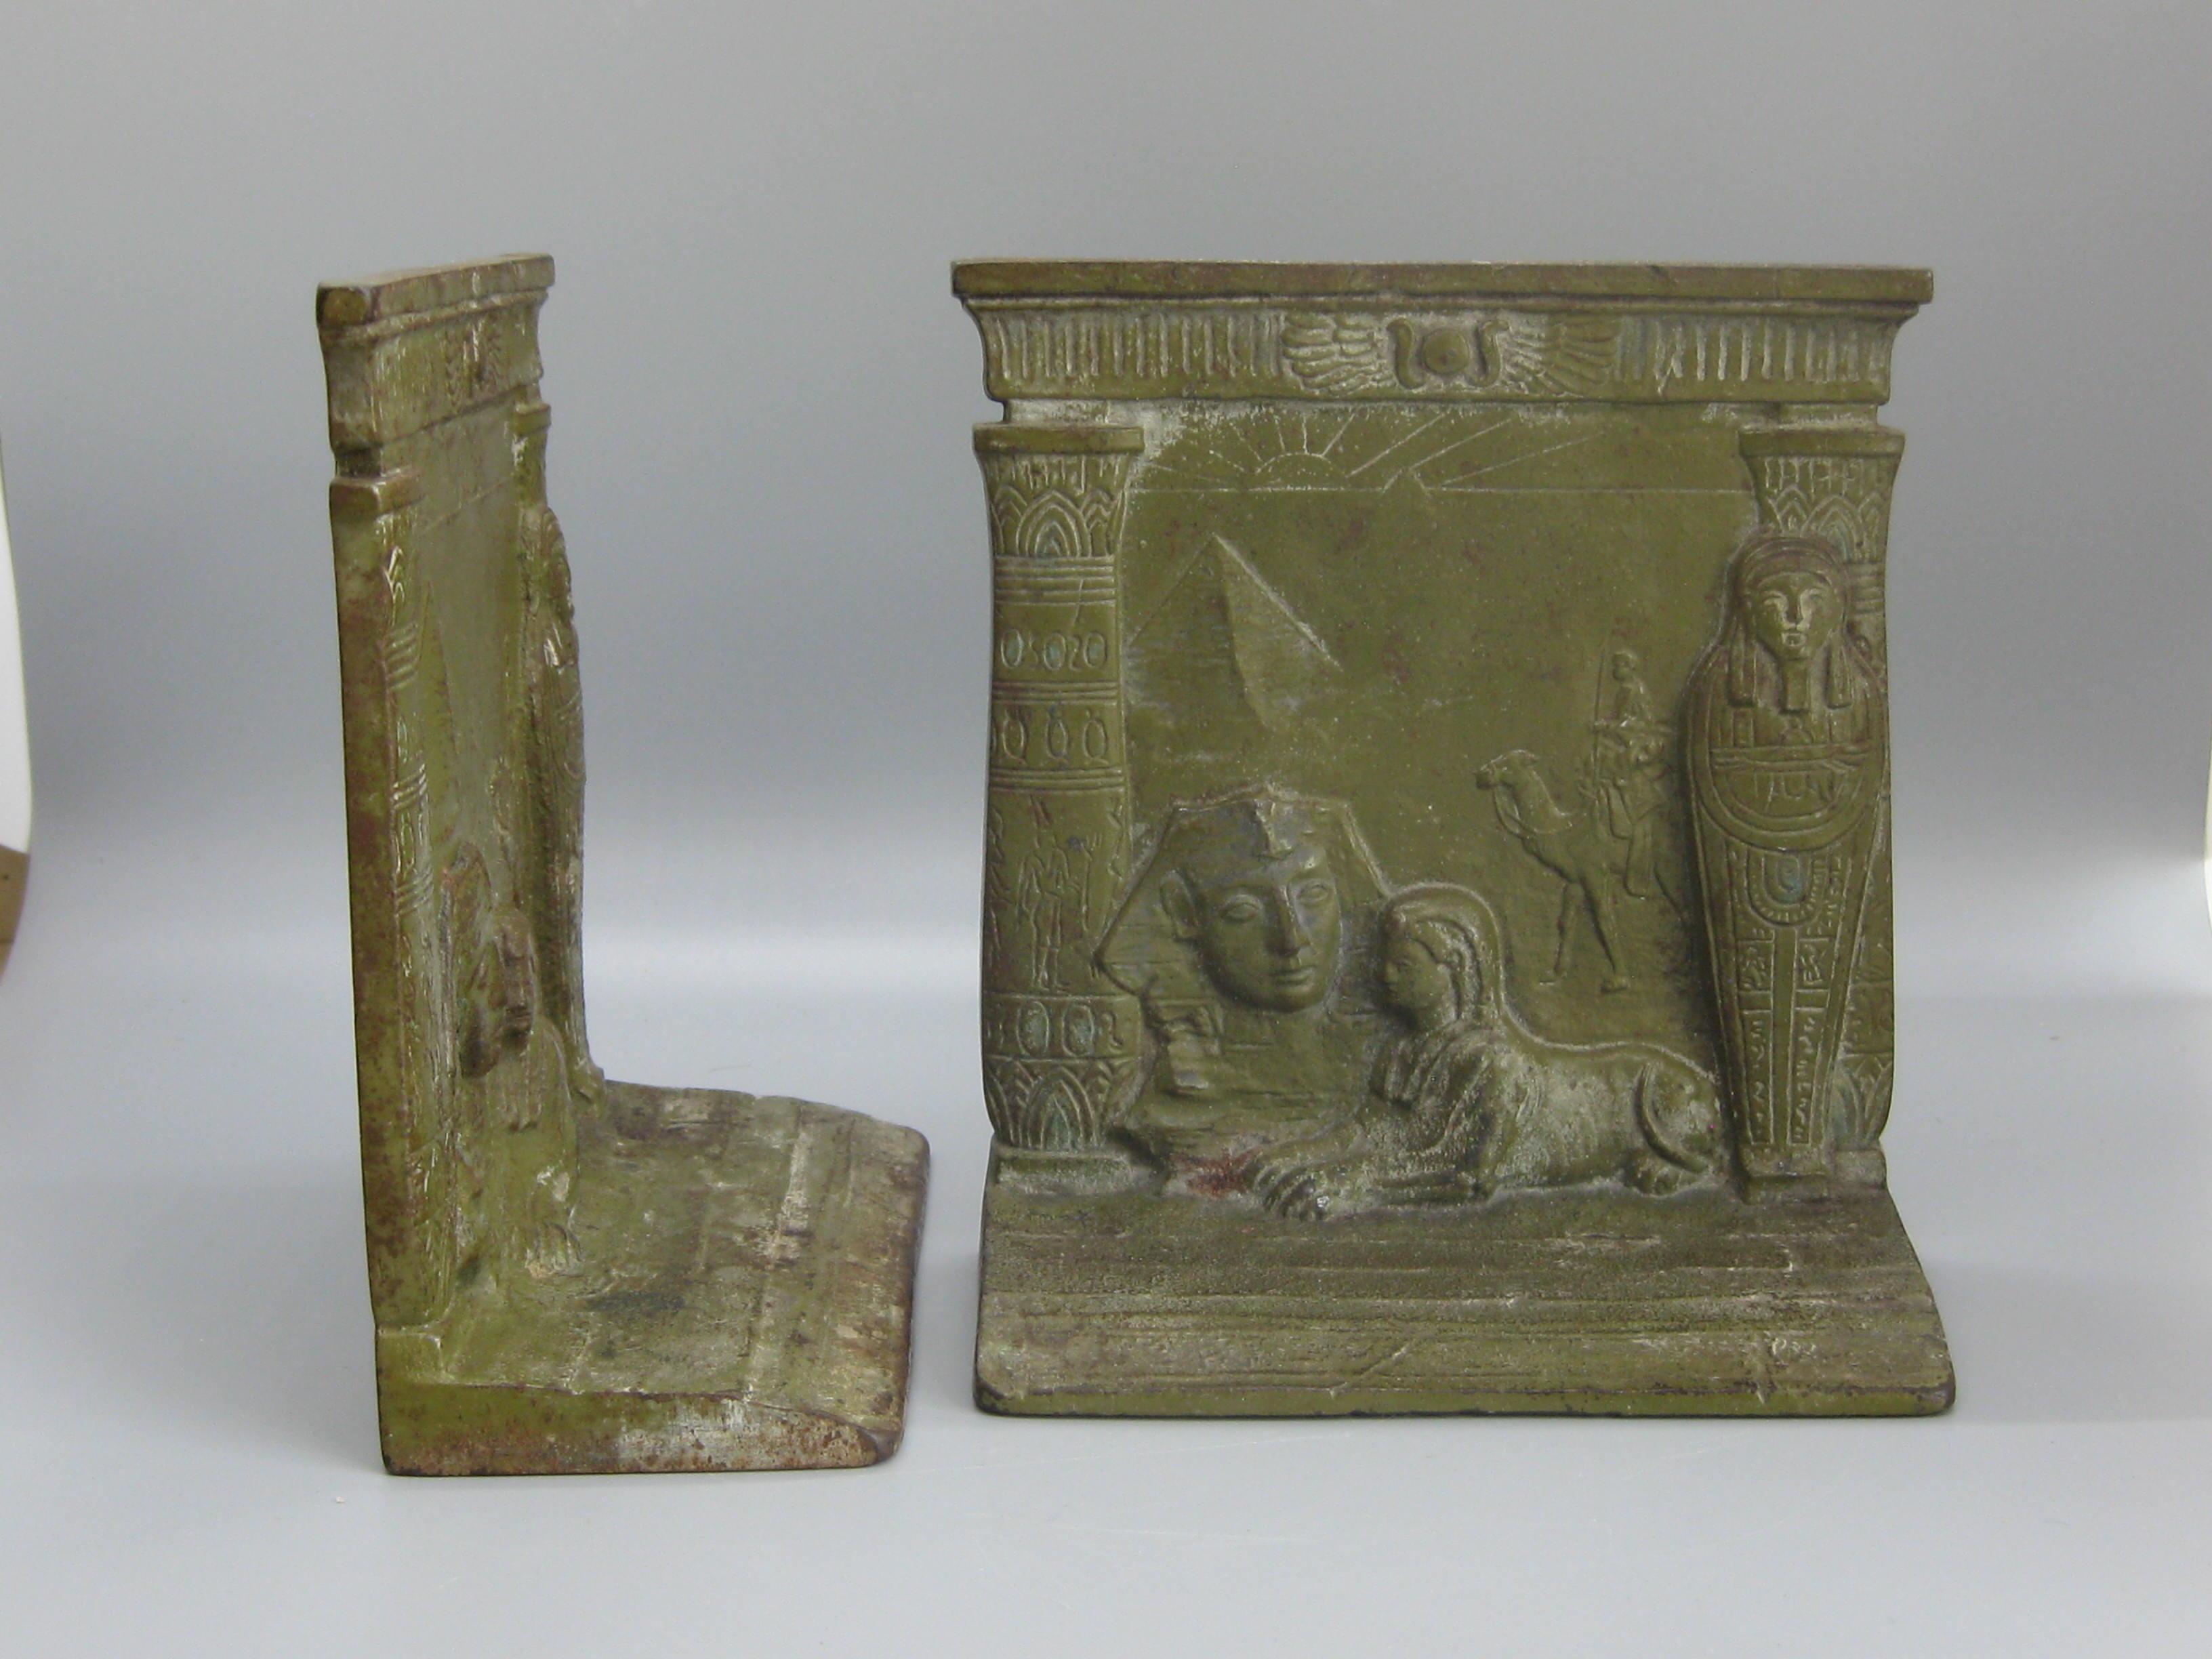 Antique Art Deco Egyptian Revival Judd #9900 Embossed Sphinx Cast Iron Bookends For Sale 7